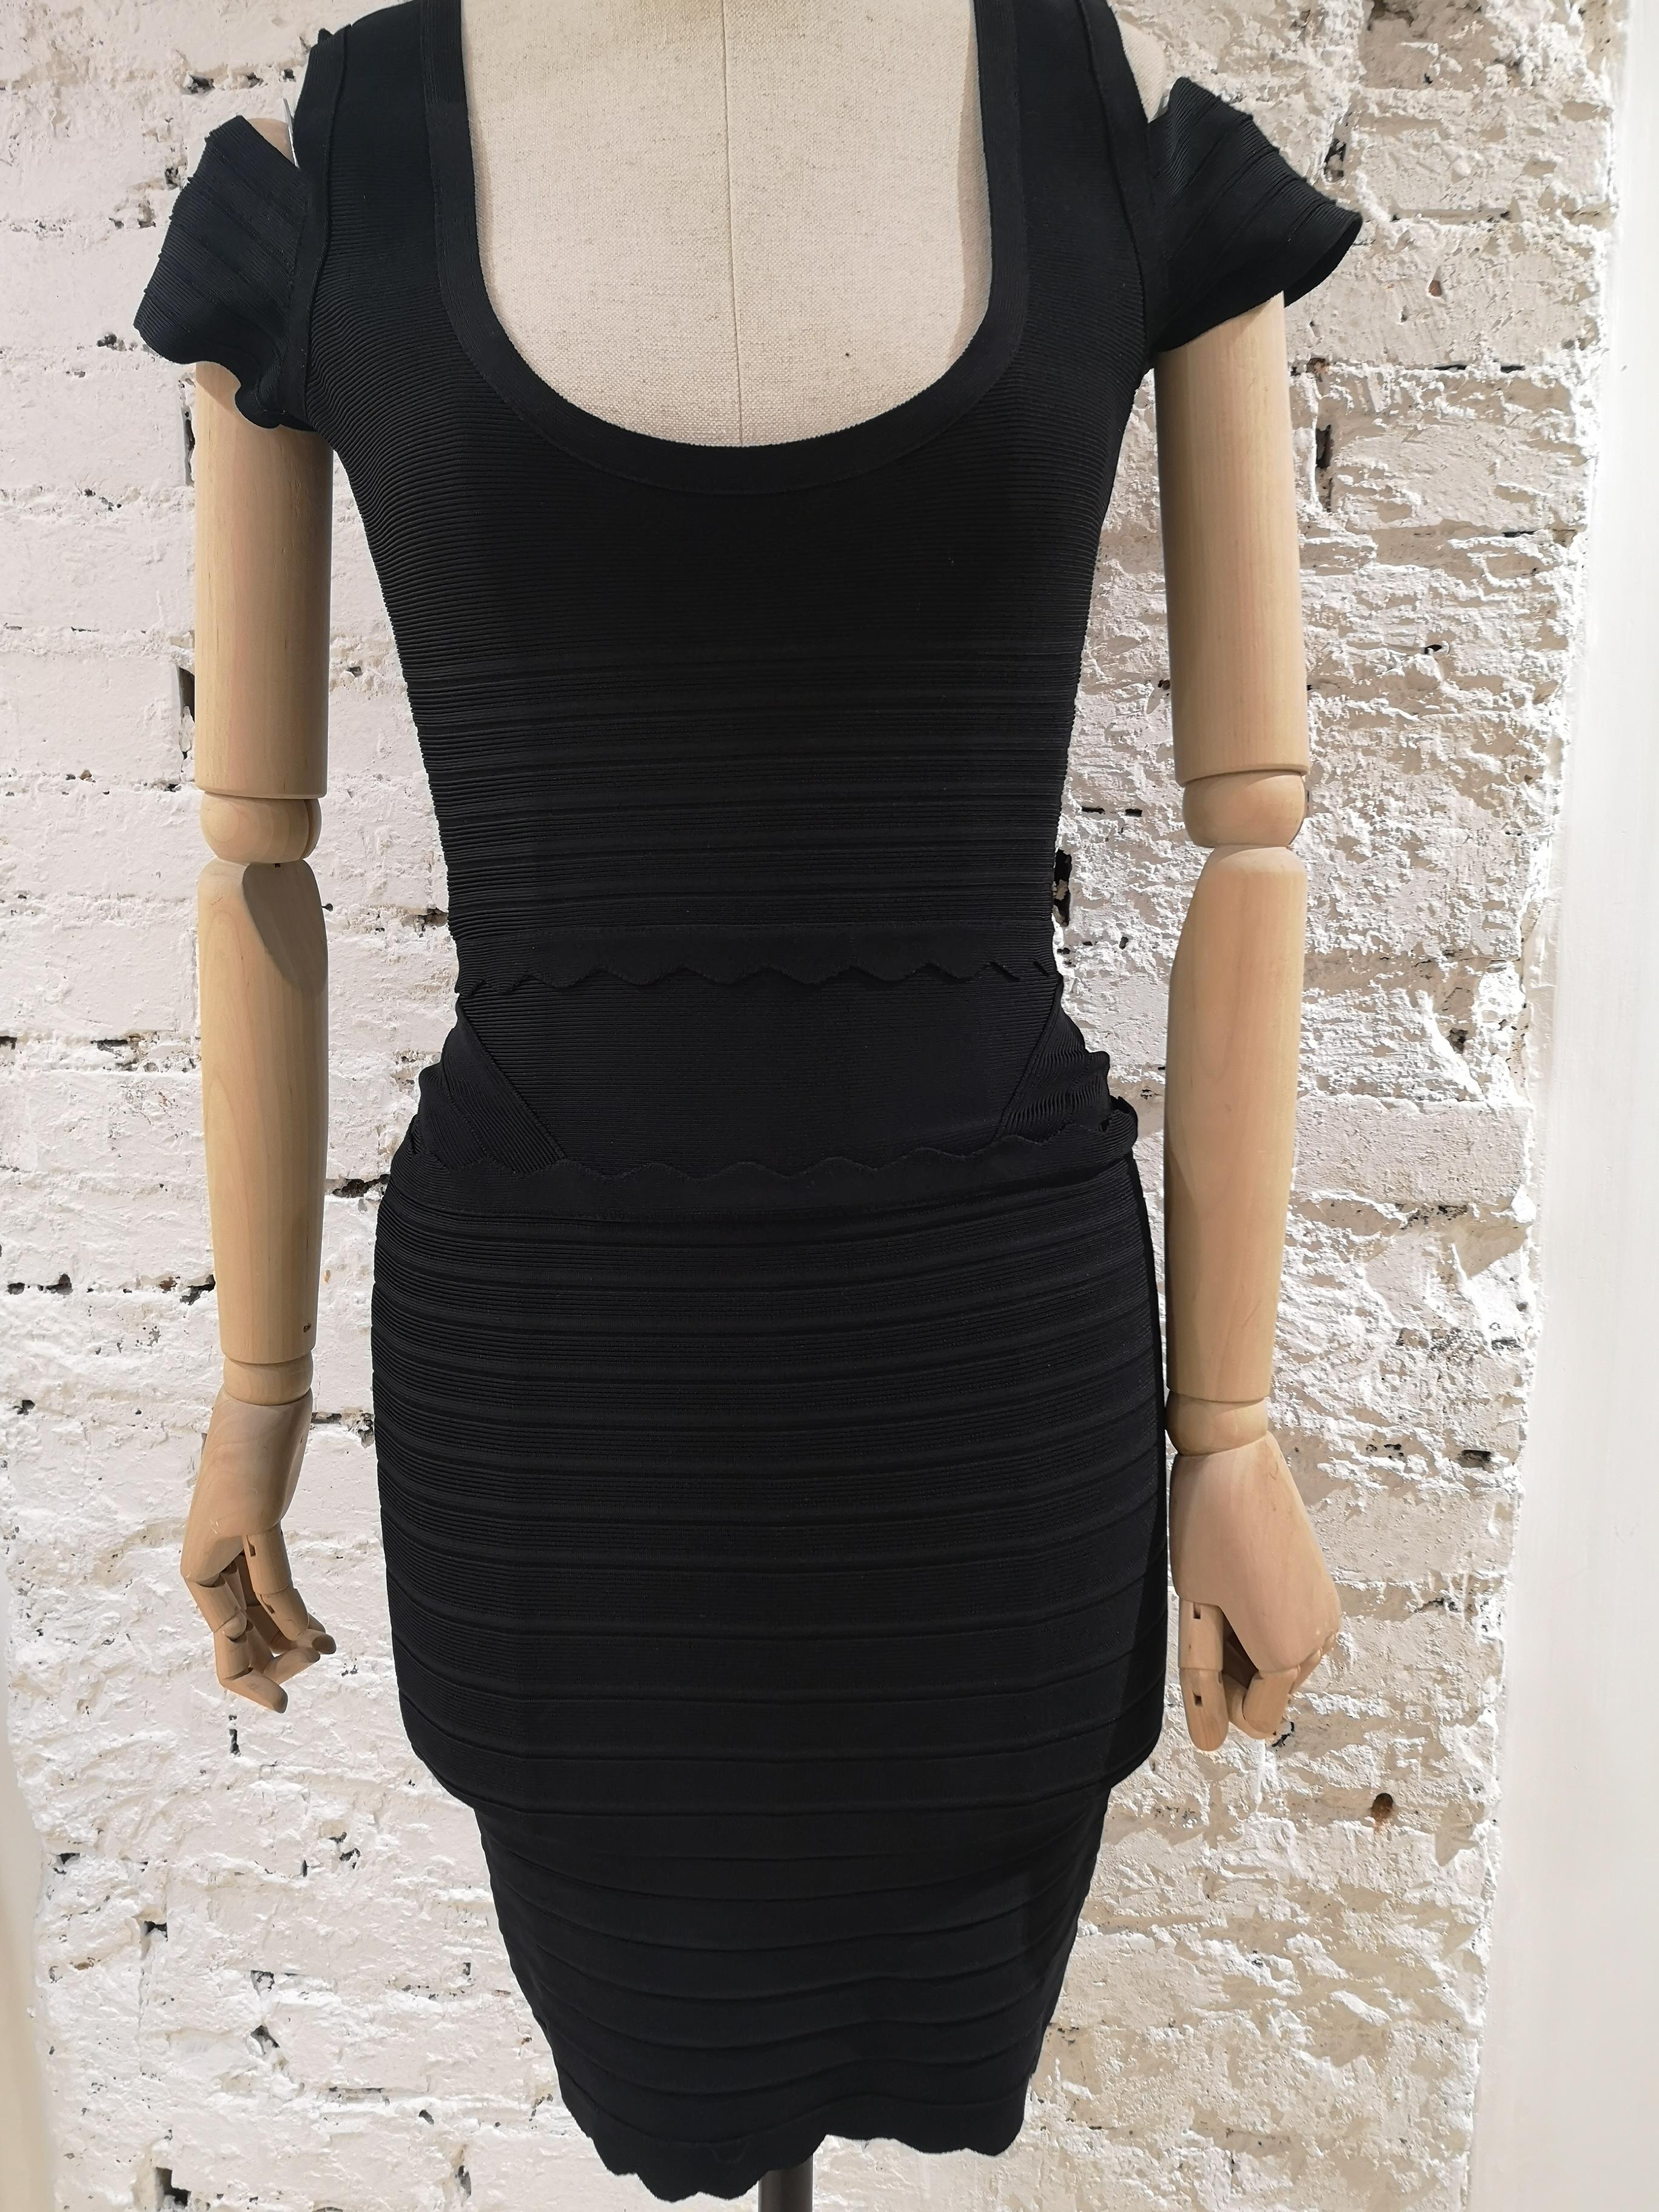 Herve Leger Robe noire RTW
taille S